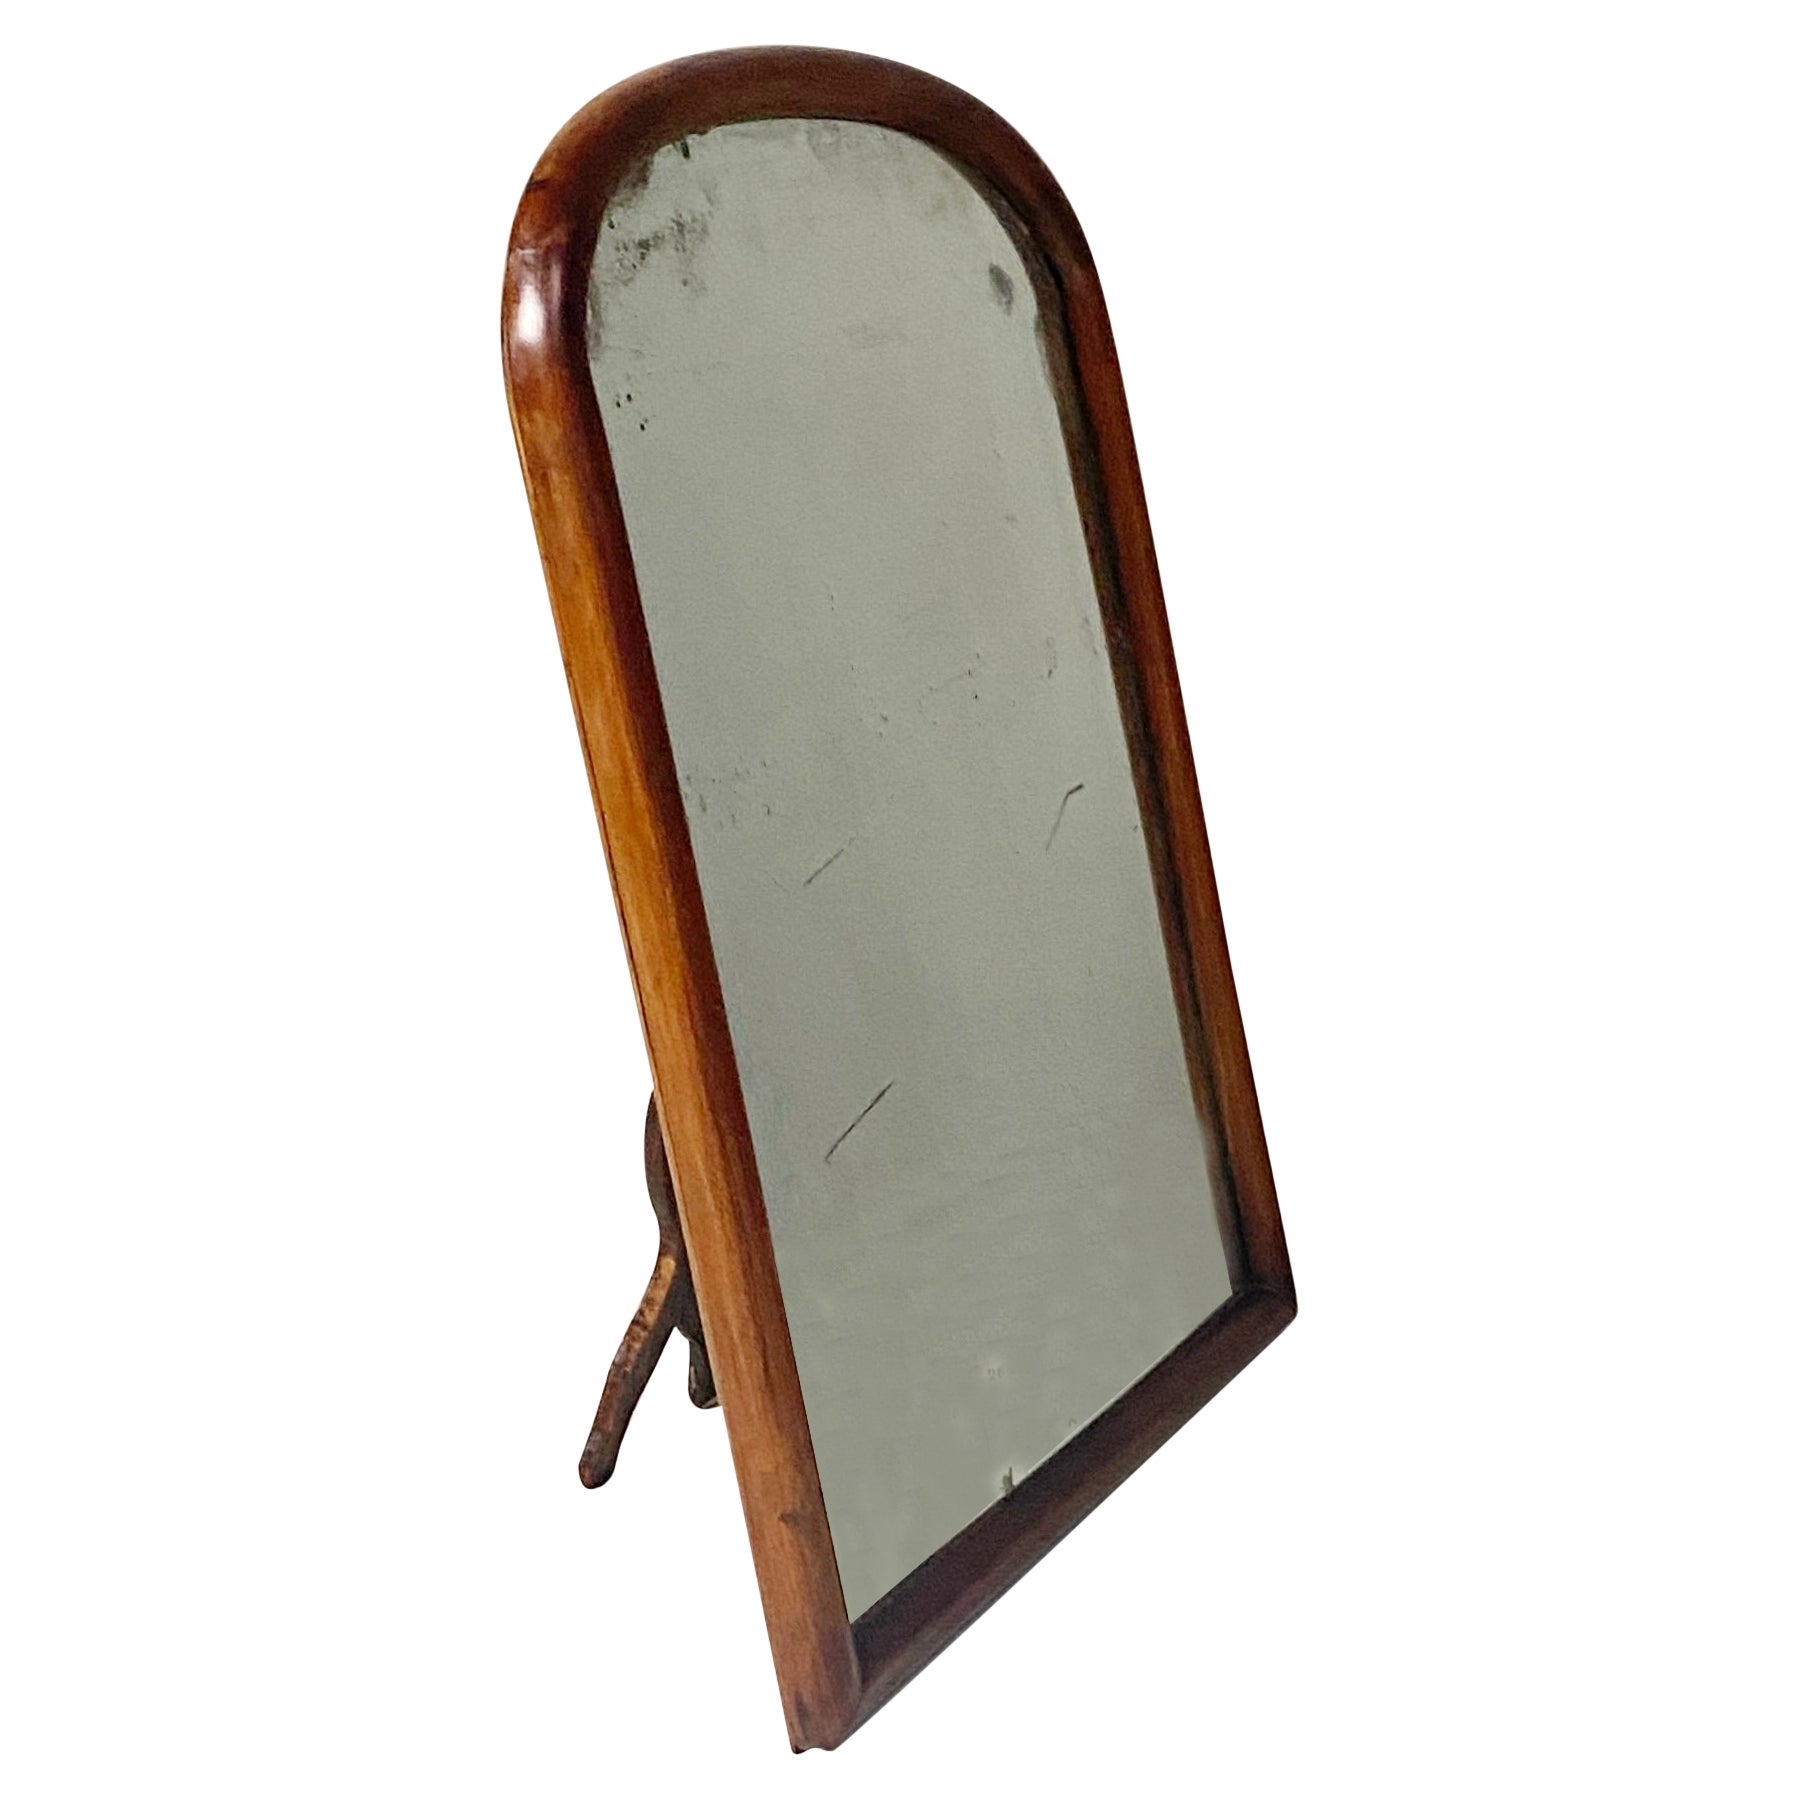 Italian 18th Century Wooden Table Mirror with Mercury Glass, 1700s For Sale